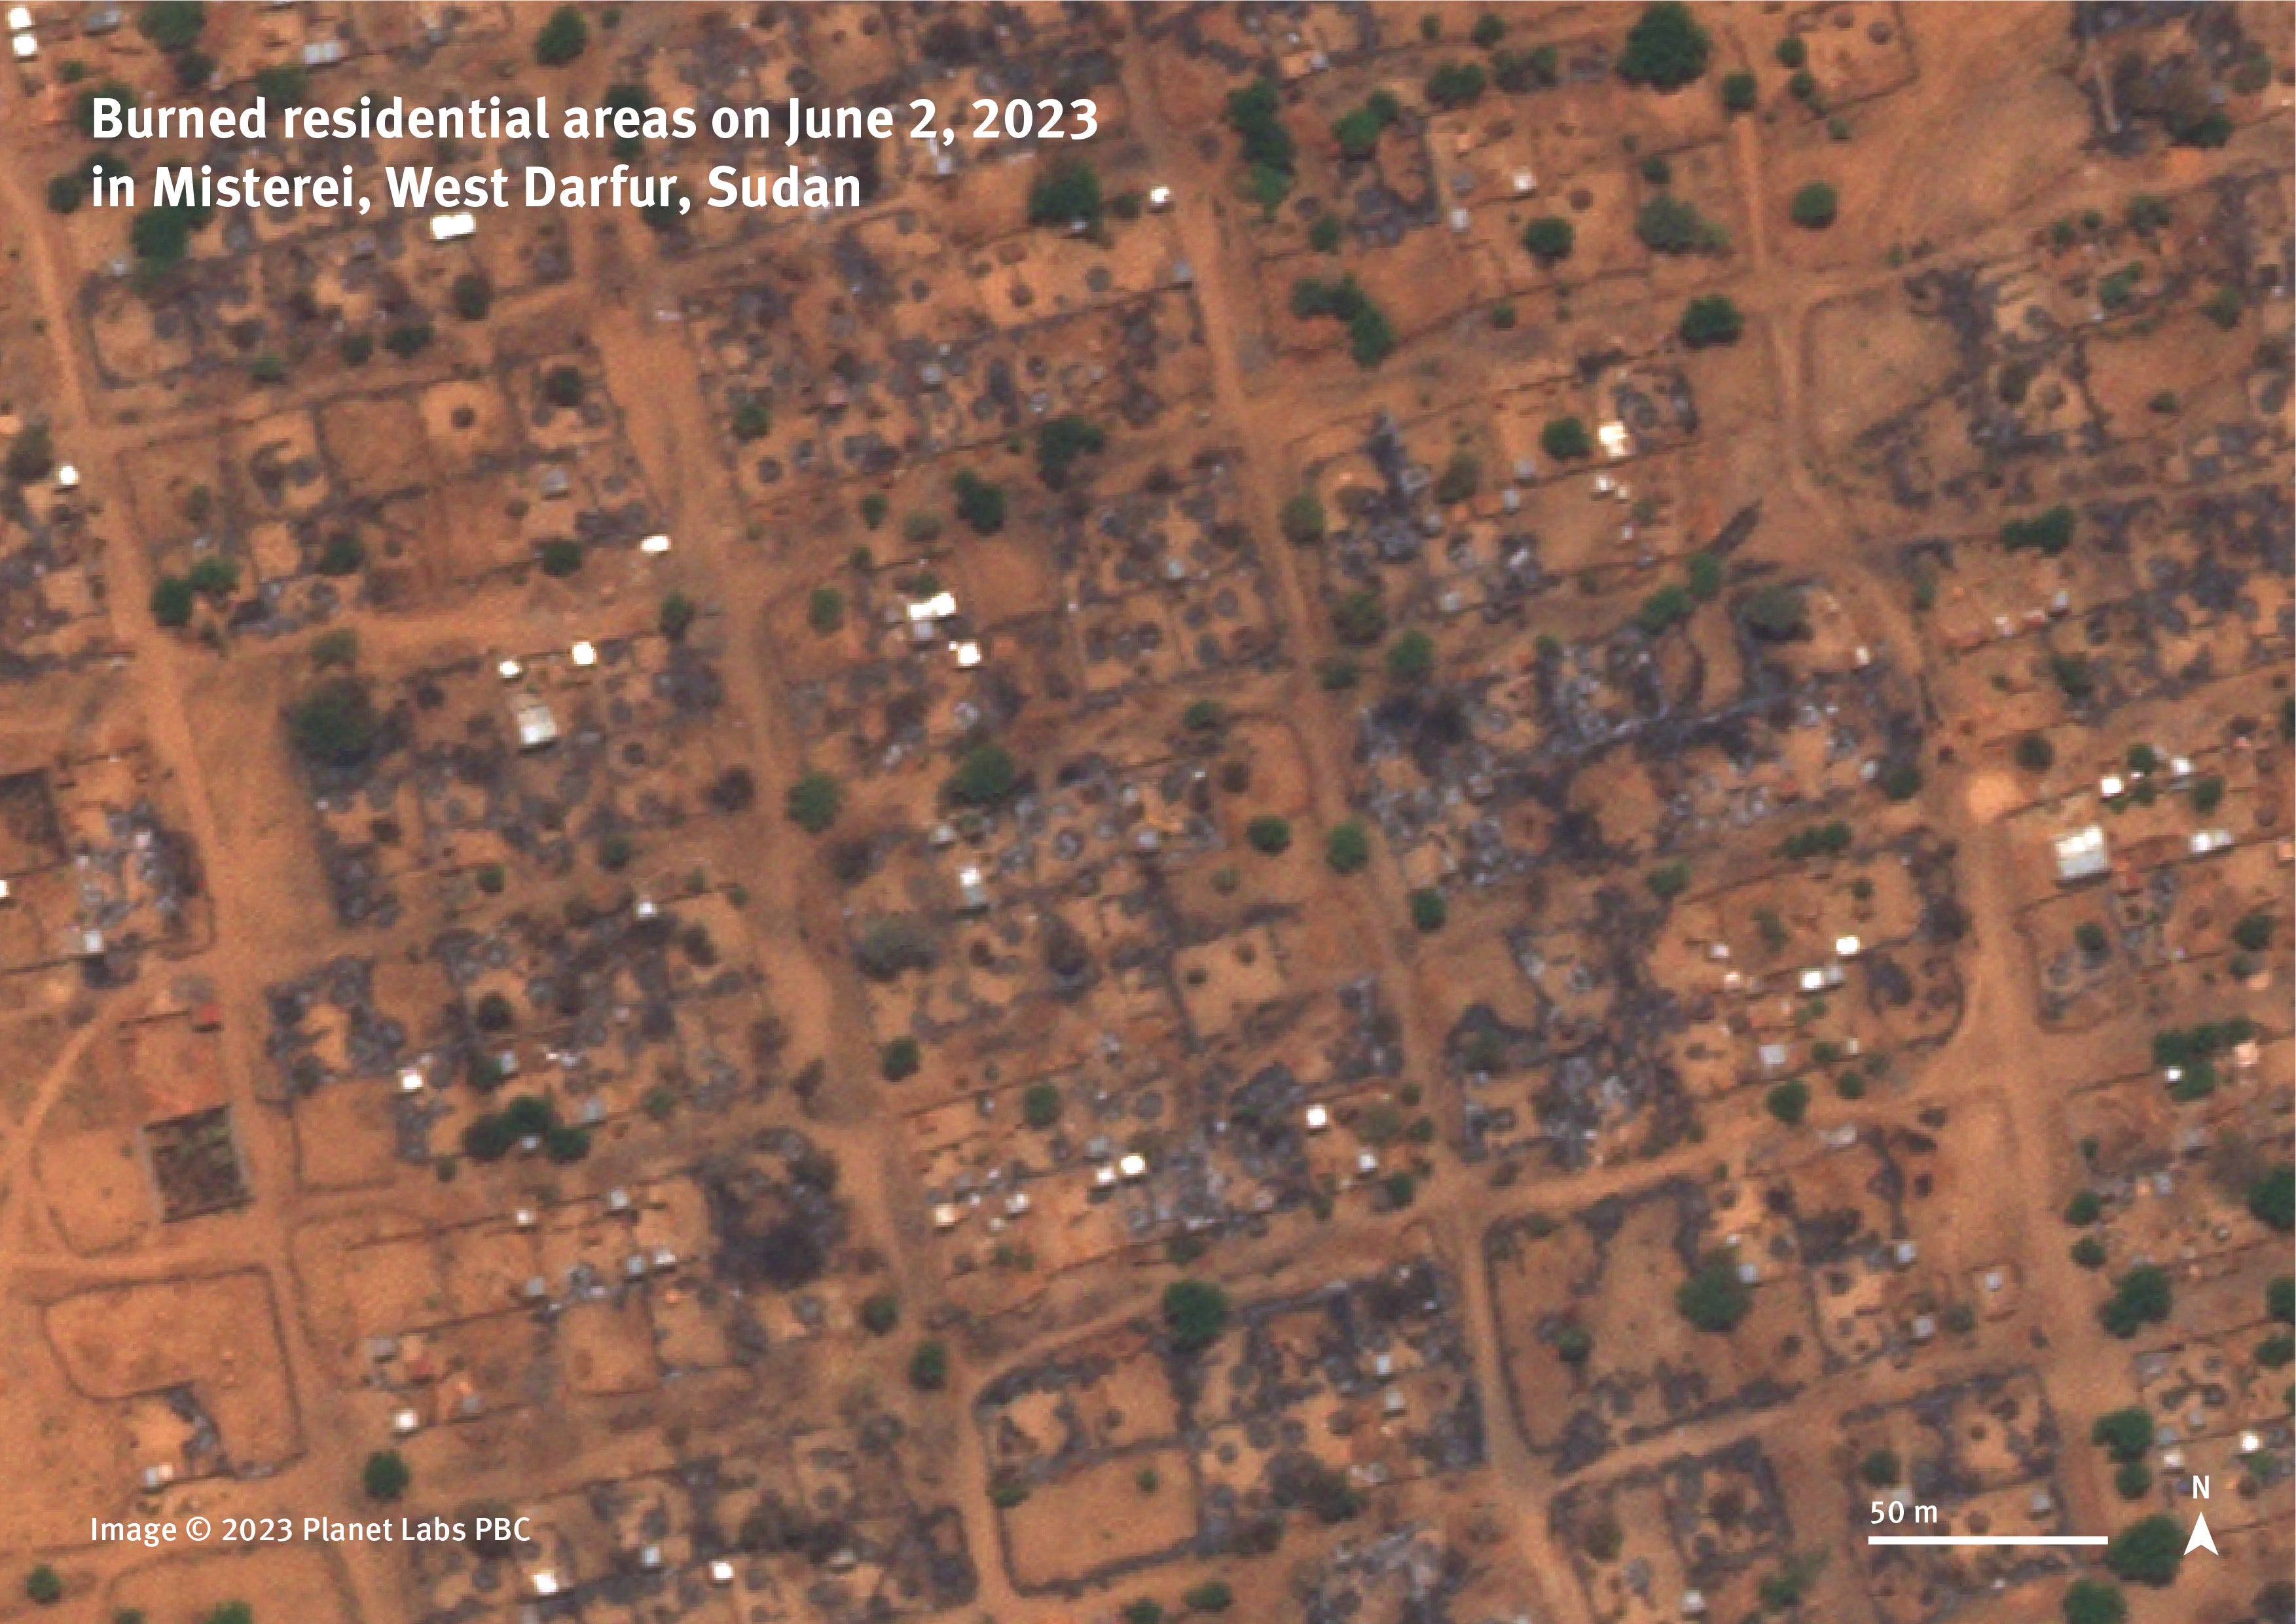 Satellite imagery of June 2, 2023 shows residential areas destroyed by fire in the town of Misterei, West Darfur, Sudan. 